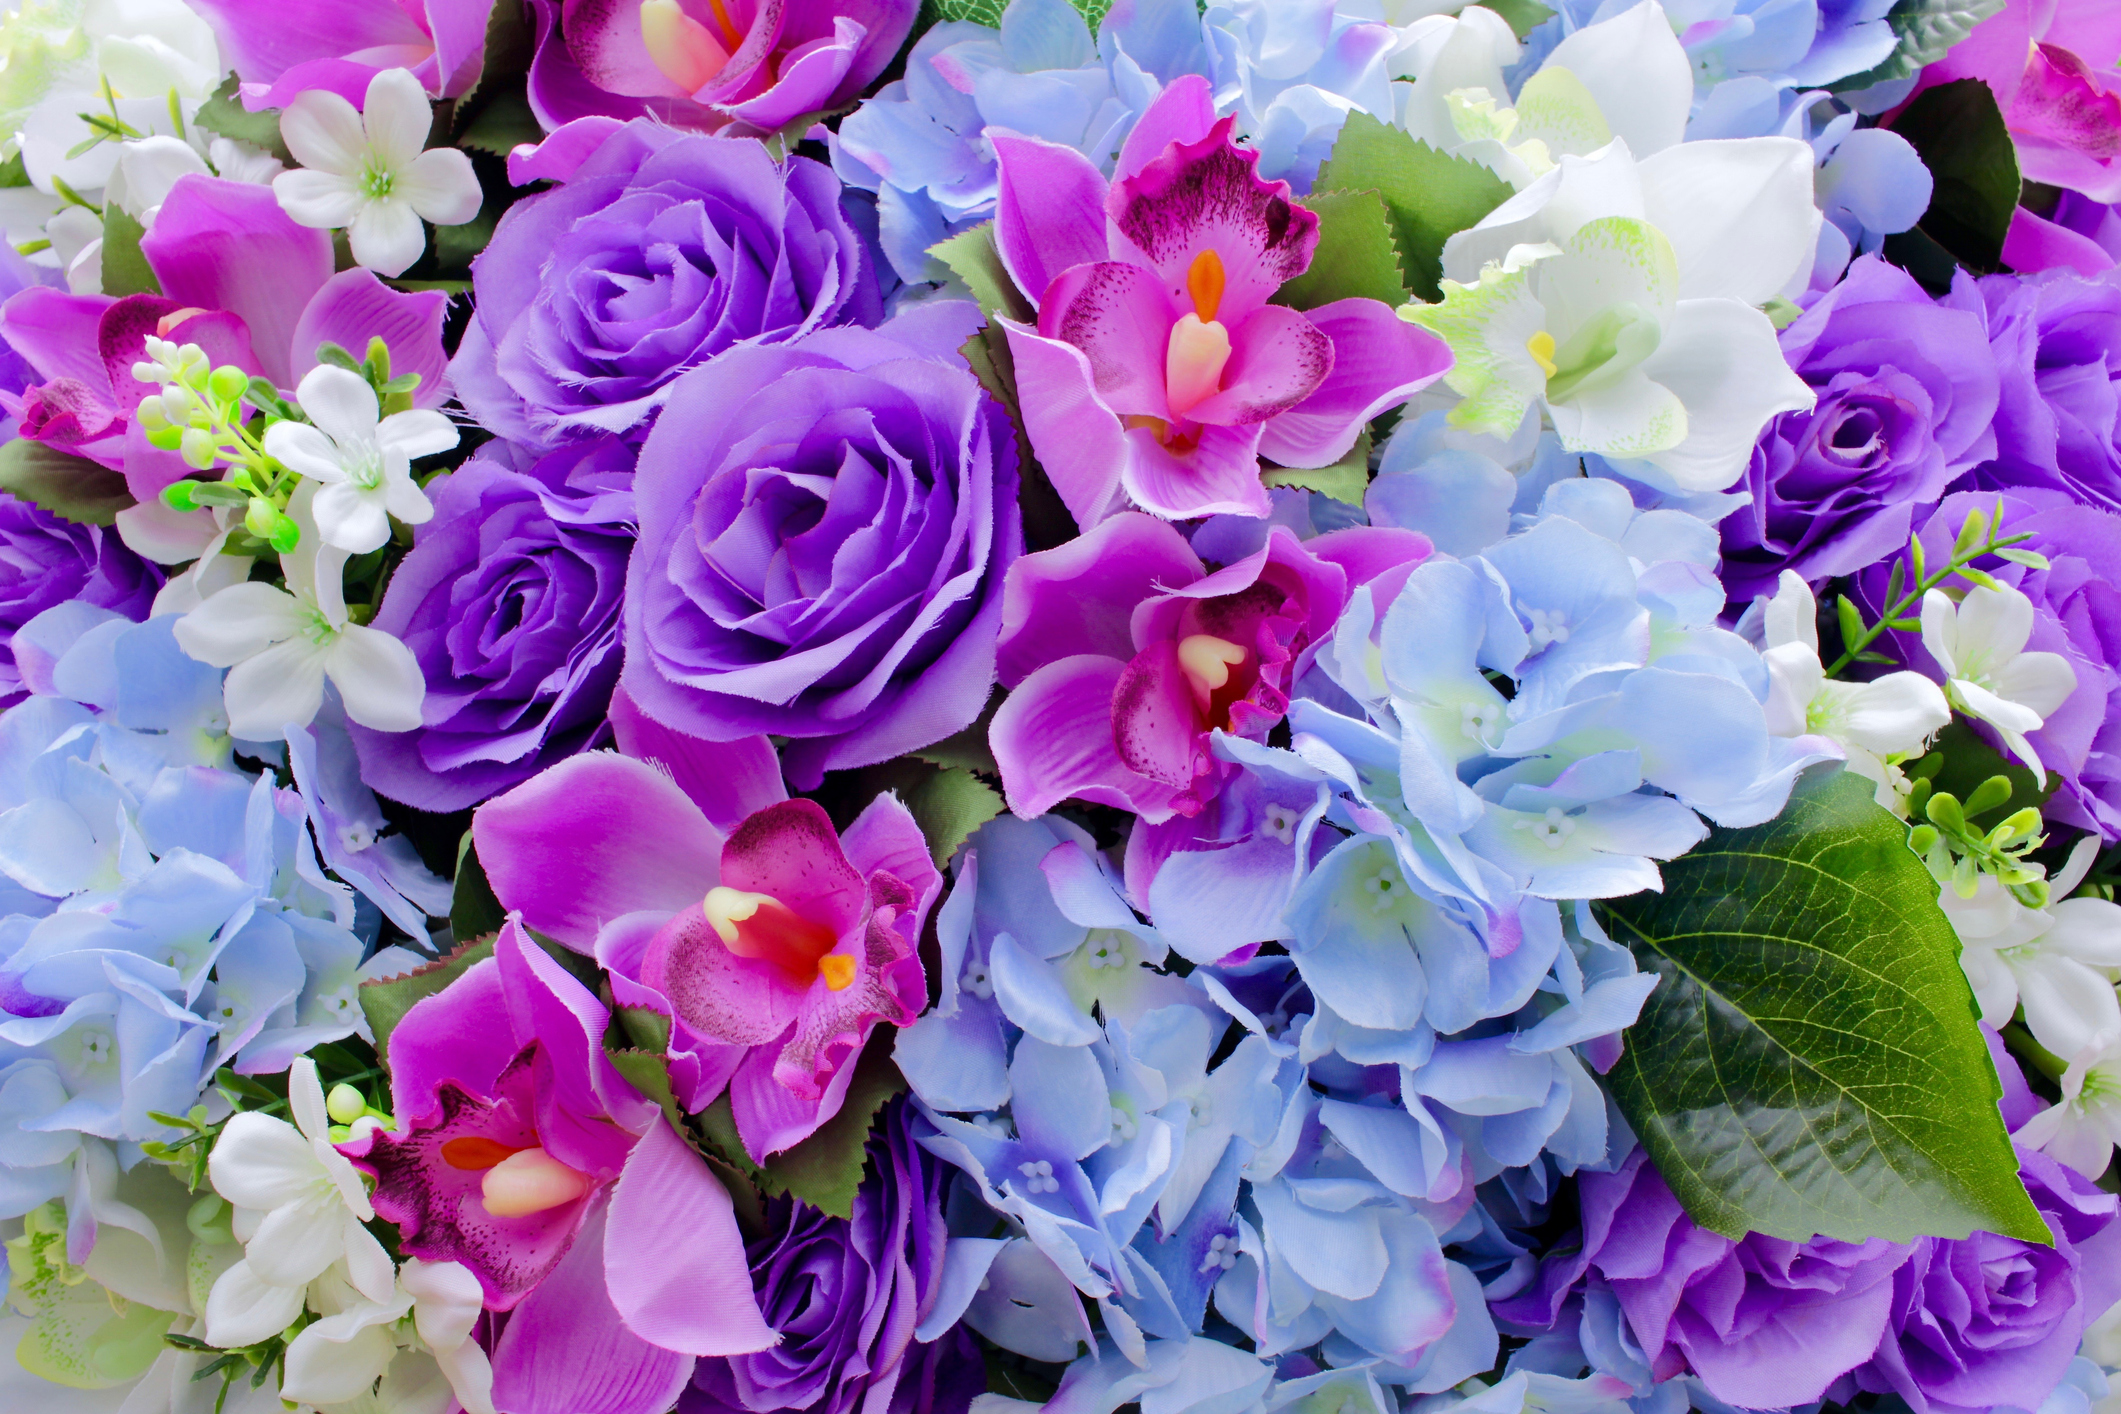 Colorful artificial flower background, purple, pink, white, blue, pink, orchid